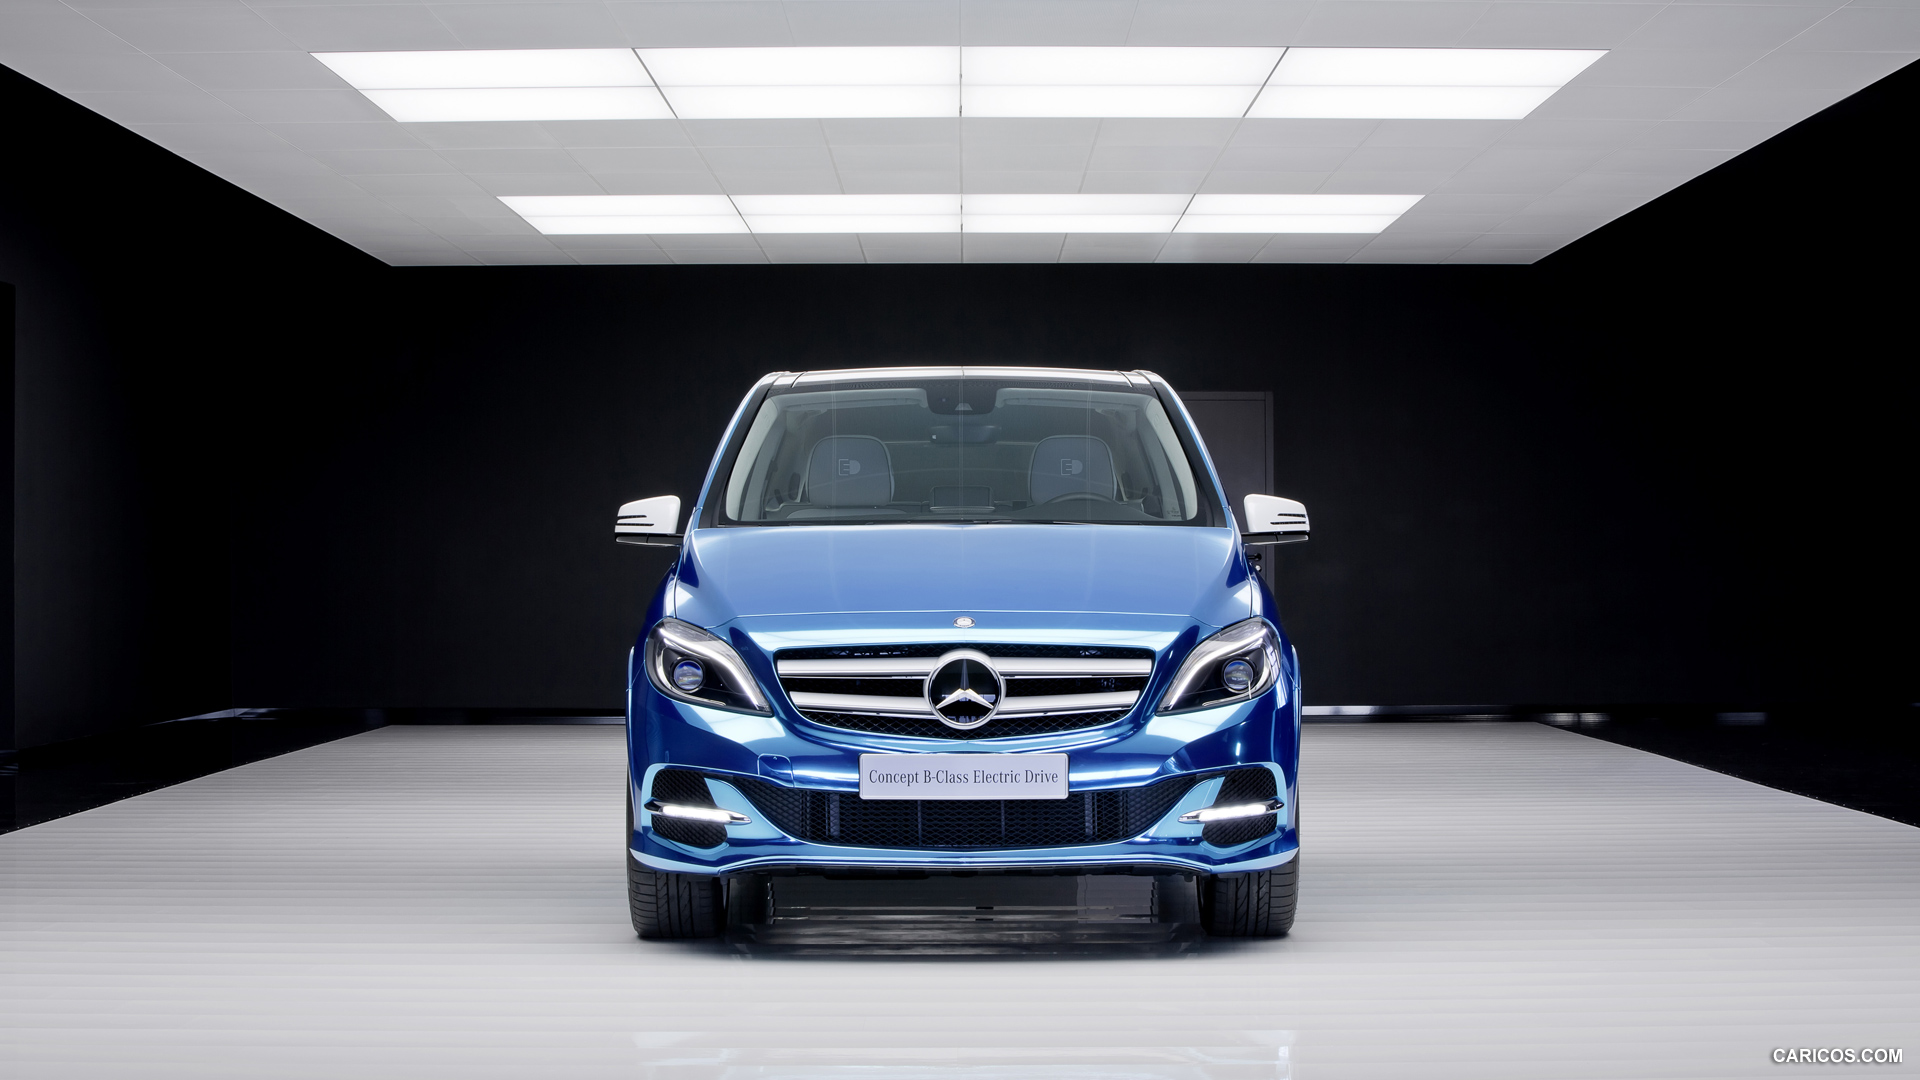 2012 Mercedes-Benz B-Class Electric Drive Concept  - Front, #12 of 18